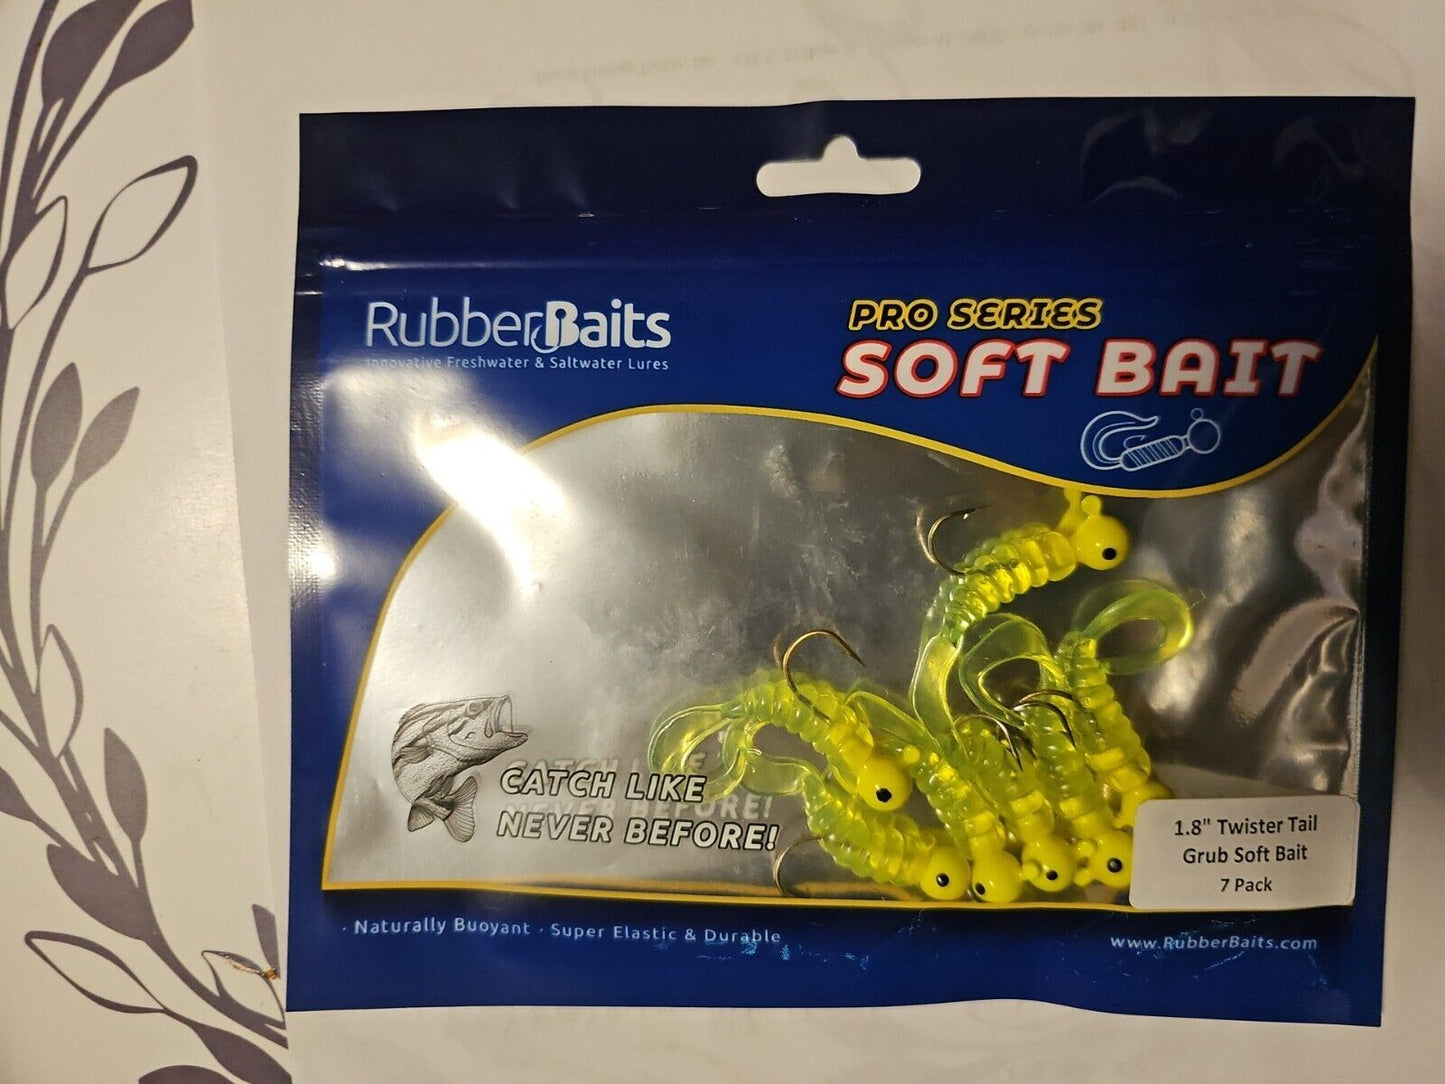 RubberBaits 1.8" Twister Tail Rigged Grub Soft Bait (7 Pack  10939